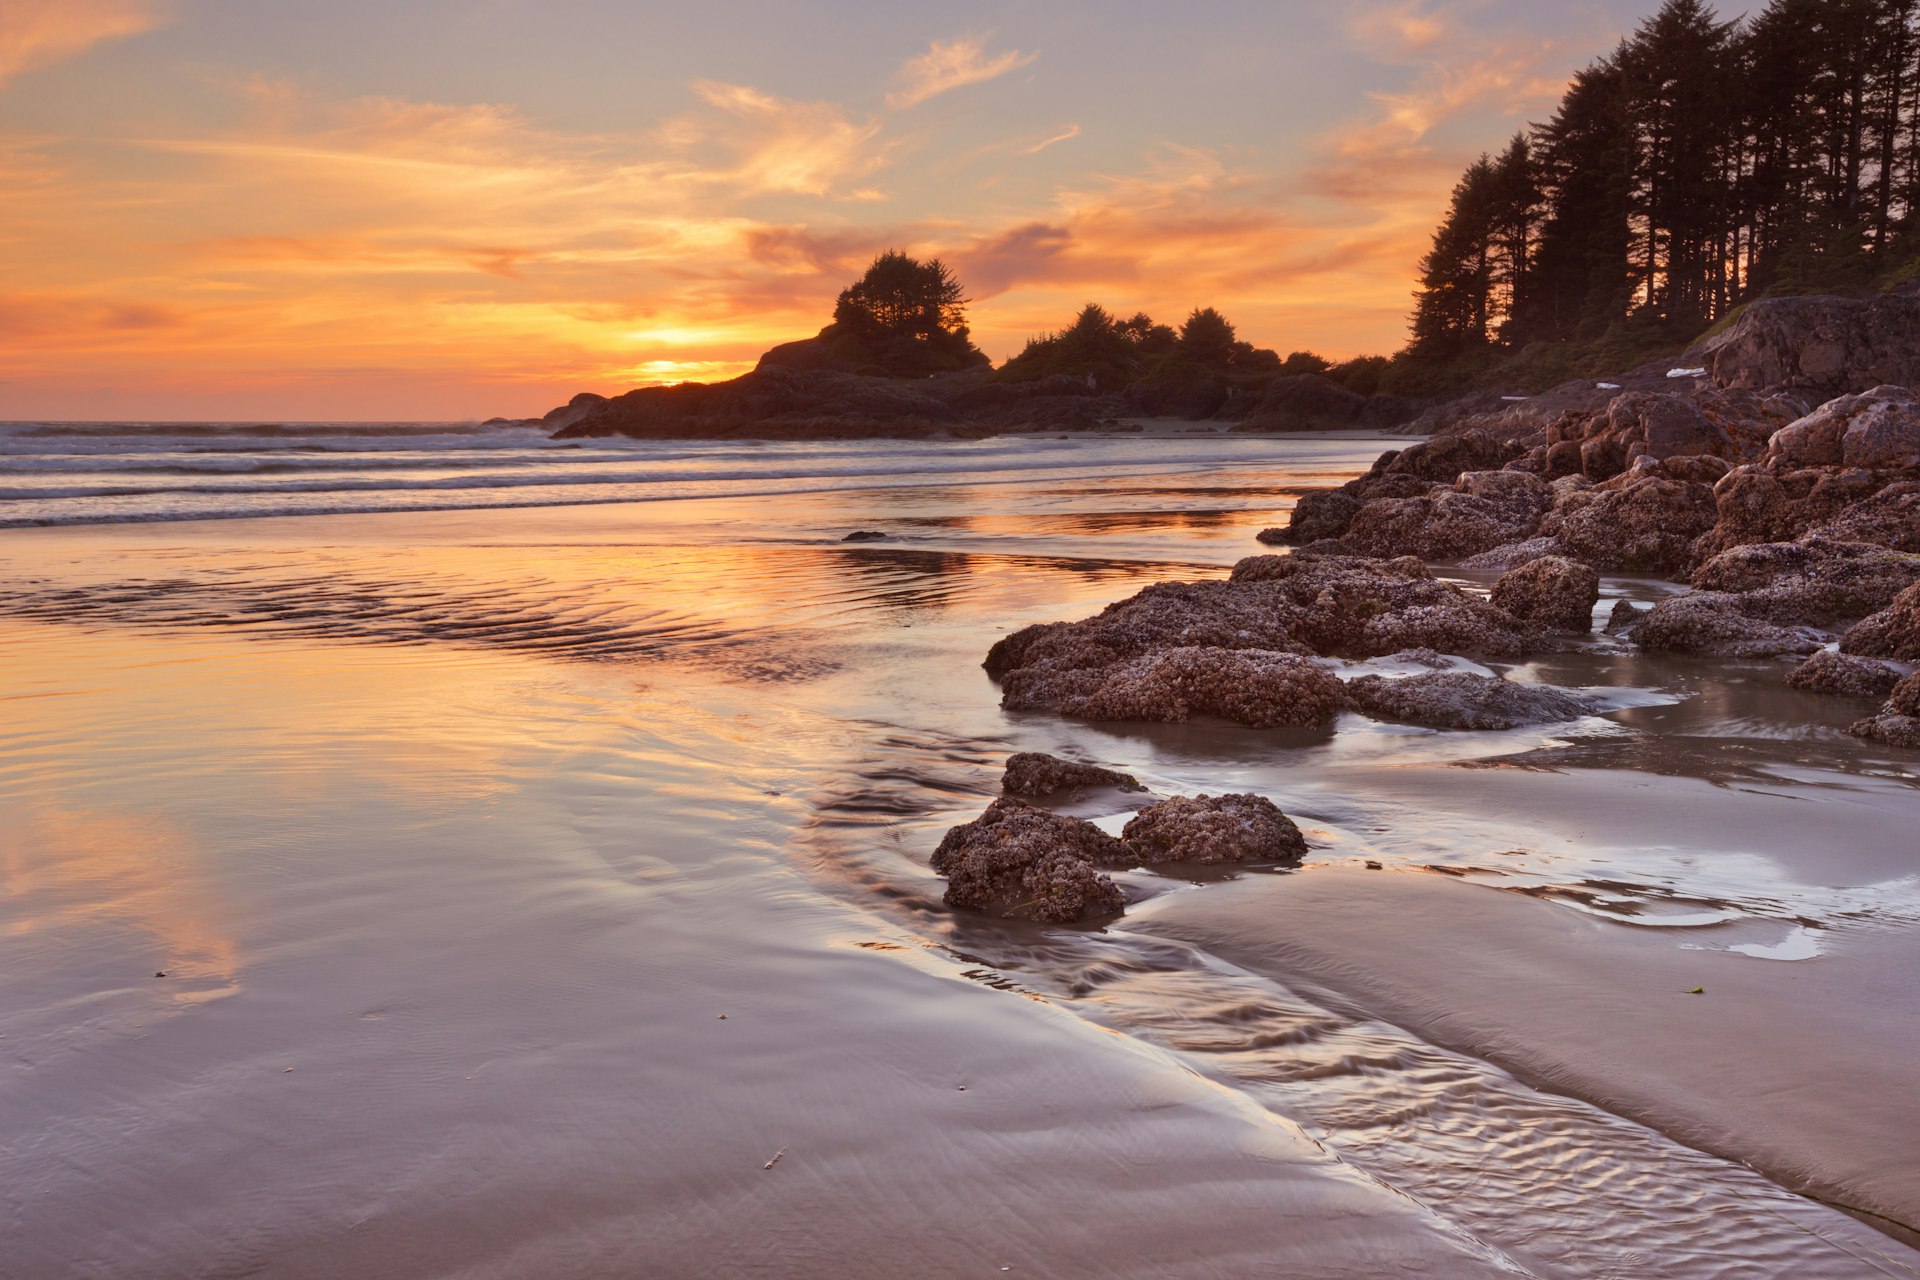 An orange-pink sunset bathes the beach at Cox Bay on Vancouver Island, Canada